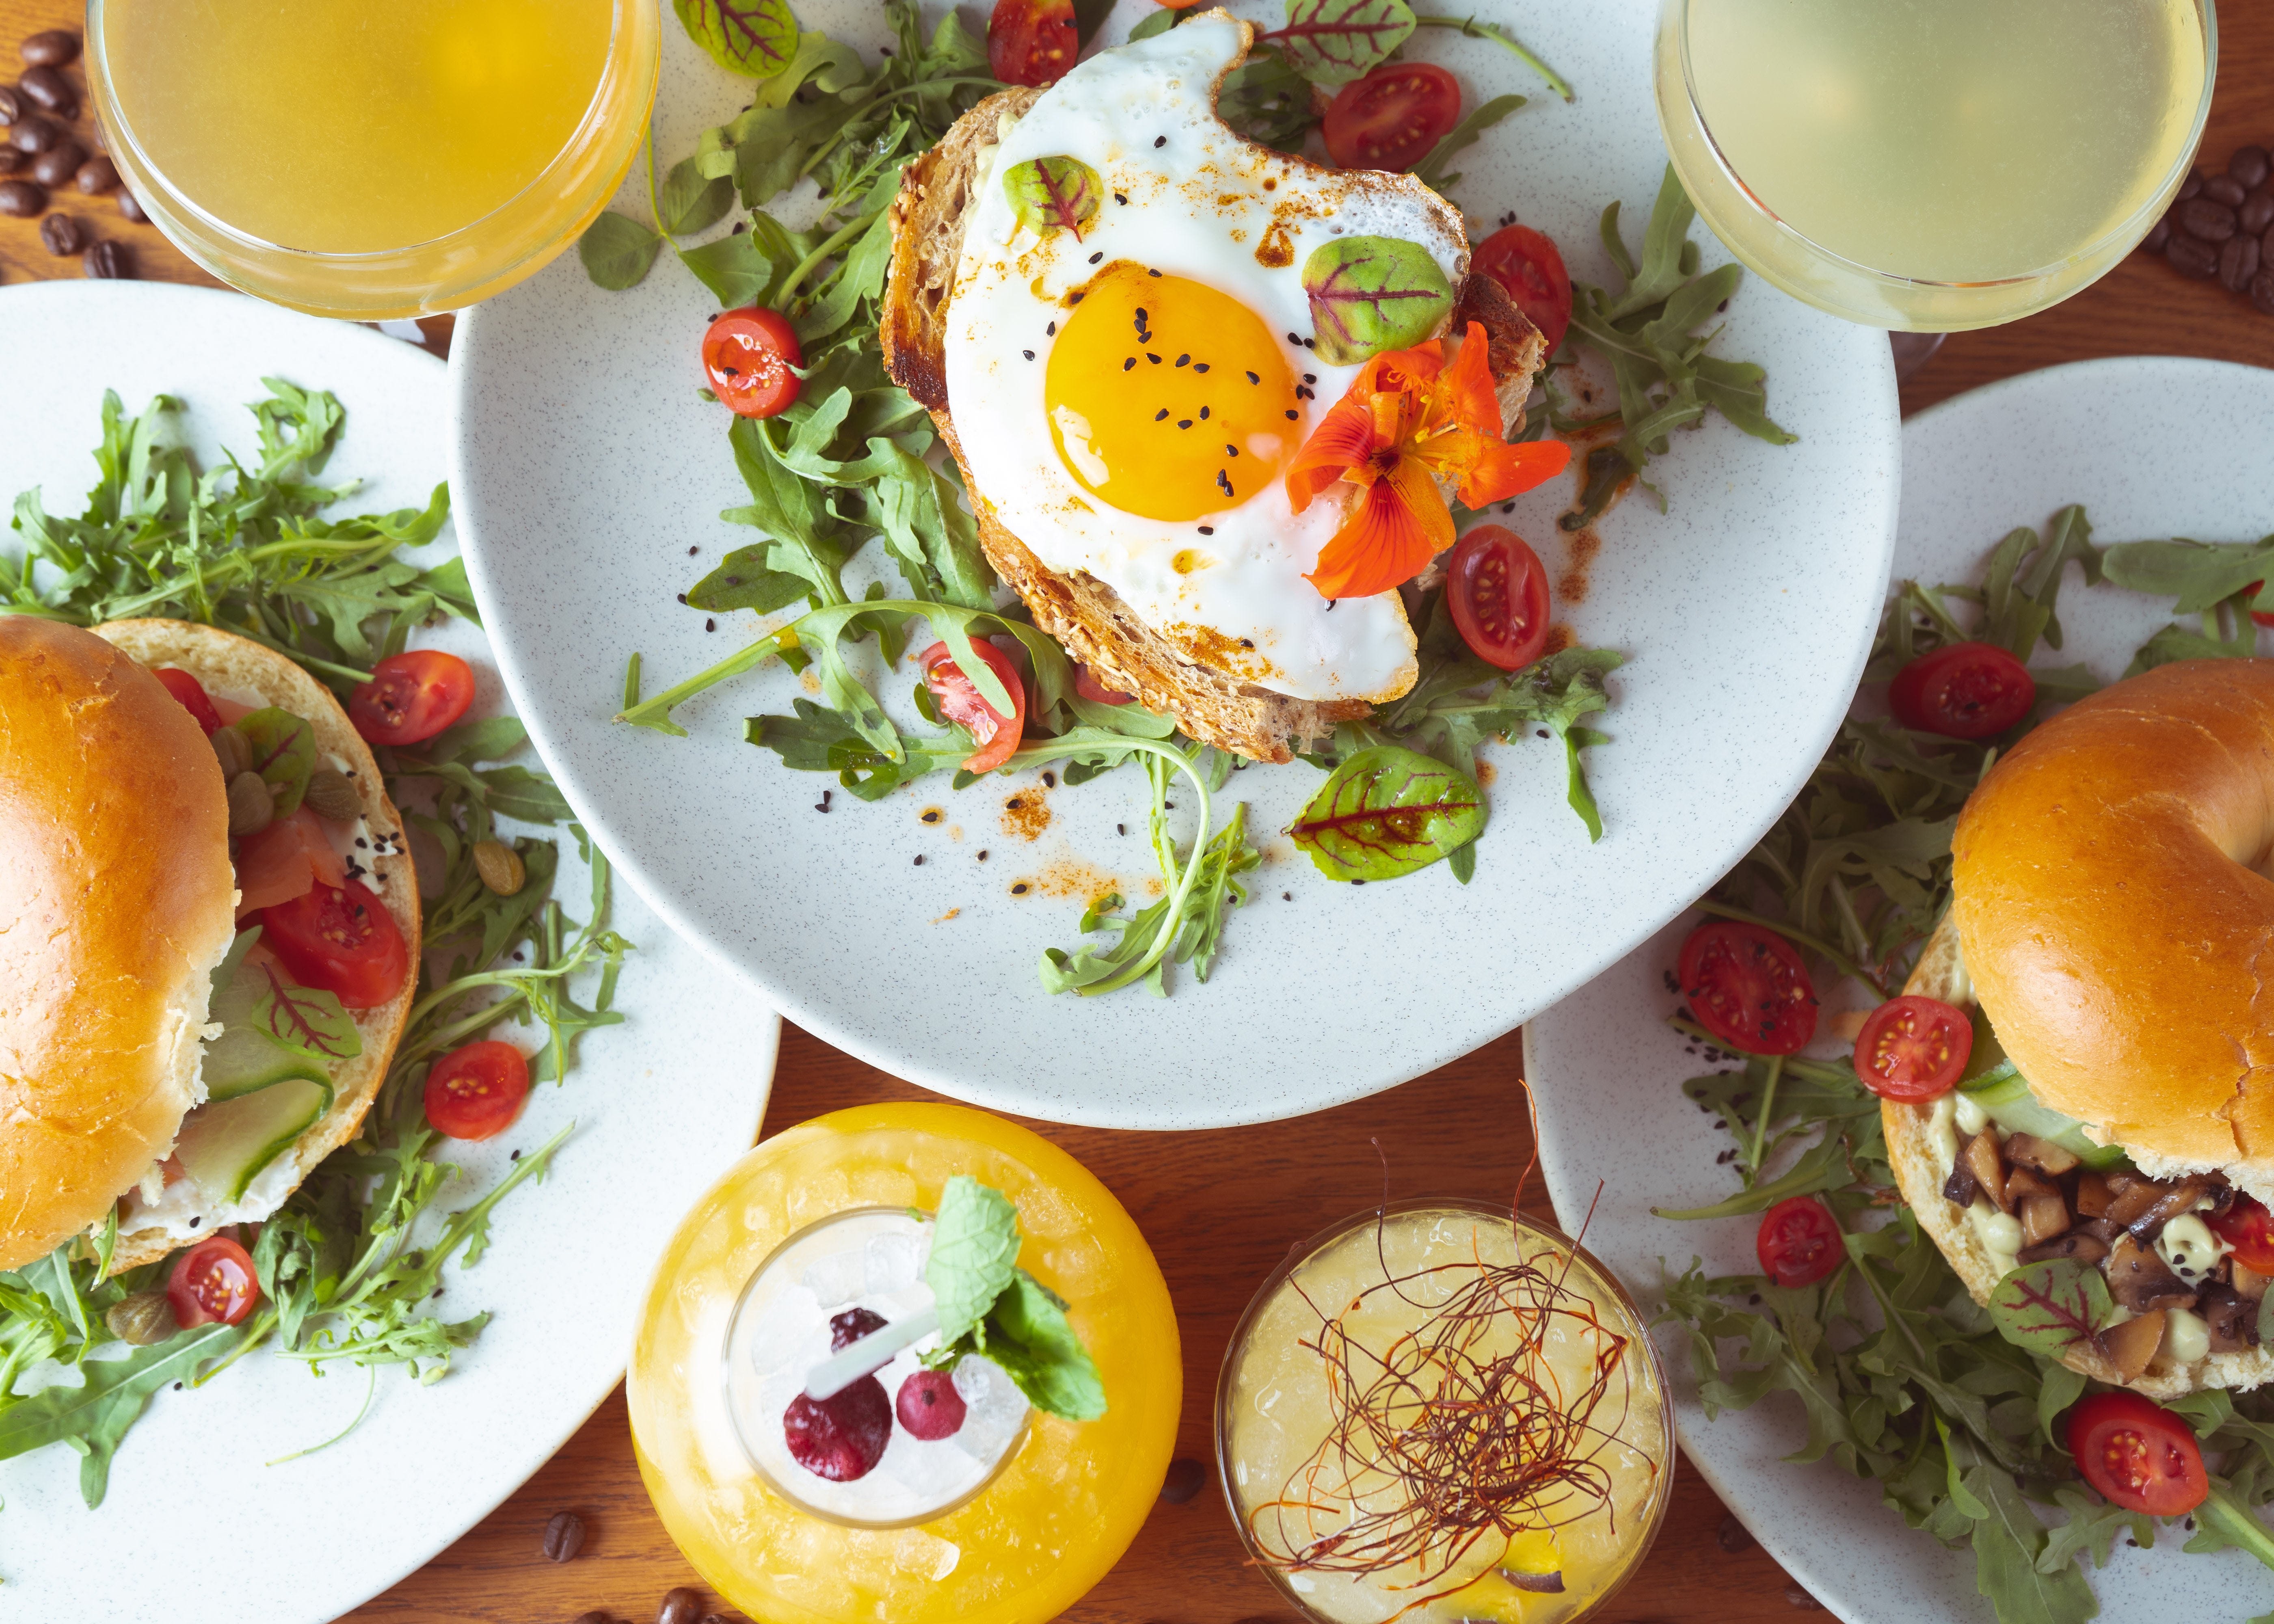 Keep on Brunching with Ping Header Image